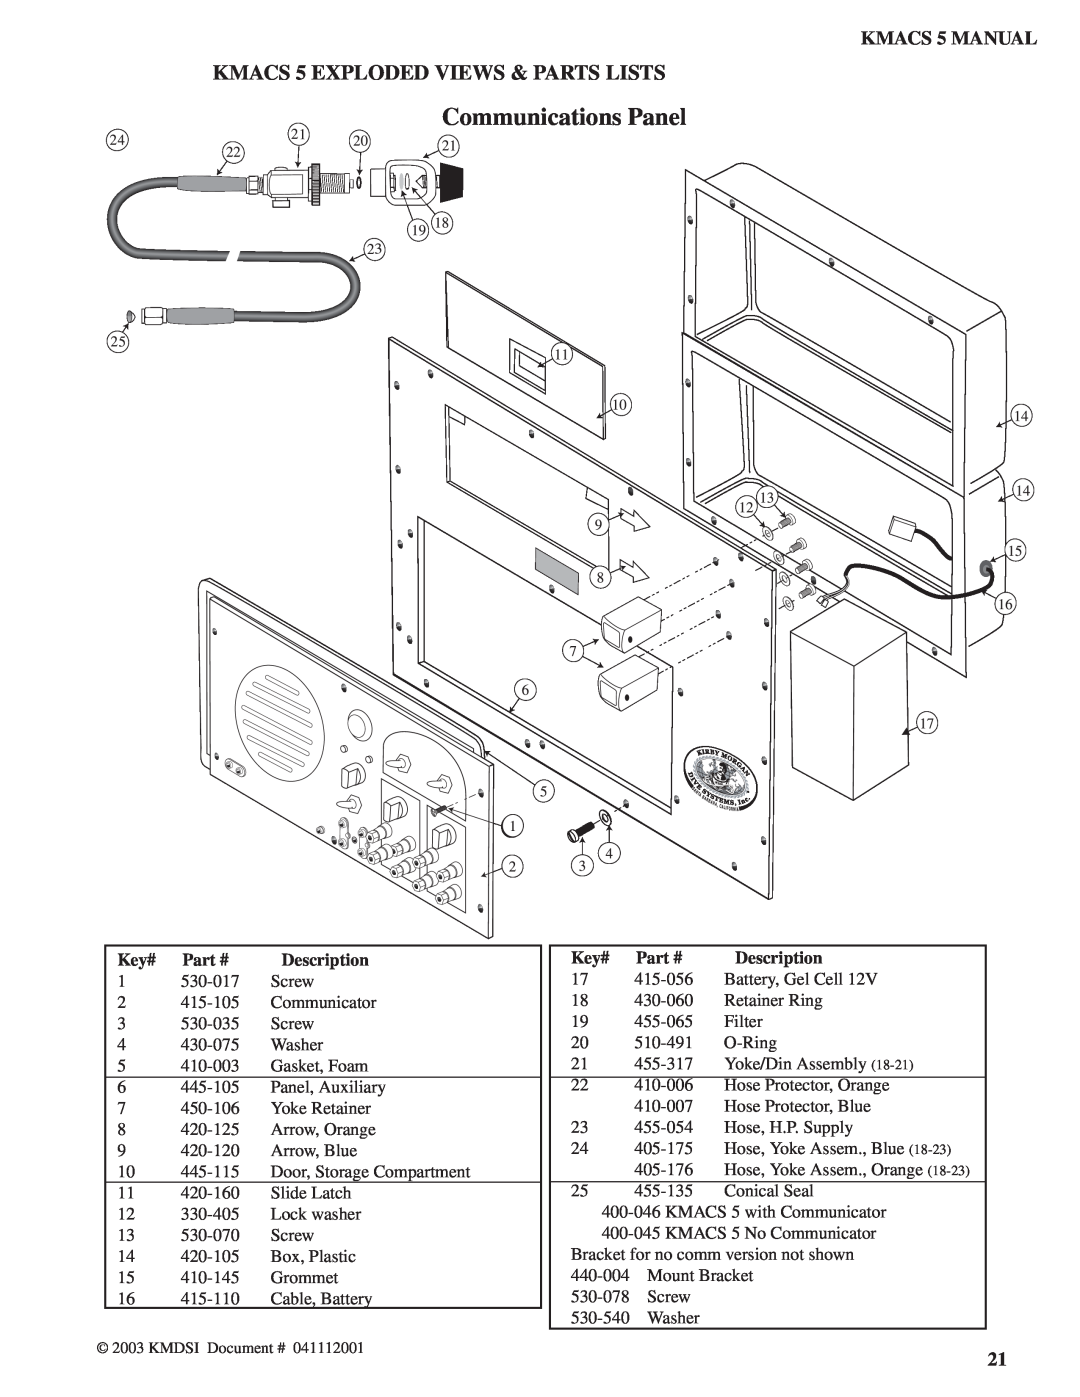 Kirby KMACS 5 EXPLODED VIEWS & PARTS LISTS, KMACS 5 MANUAL, 530-017, Screw, 415-105, Communicator, 530-035, 430-075 